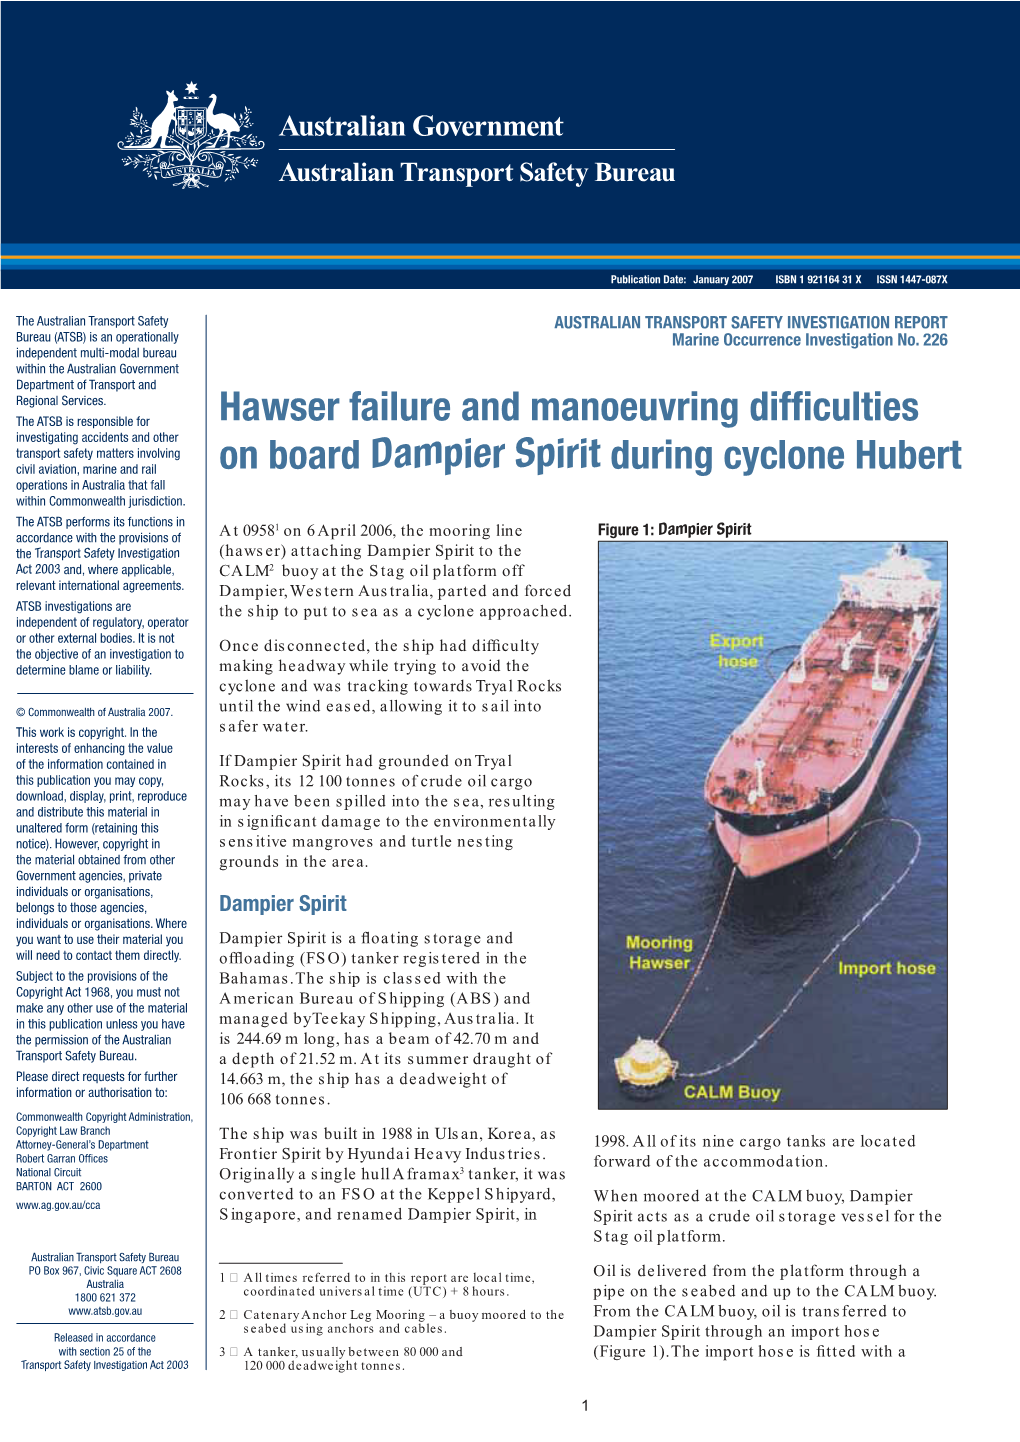 Hawser Failure and Manoeuvring Difficulties on Board Dampier Spirit